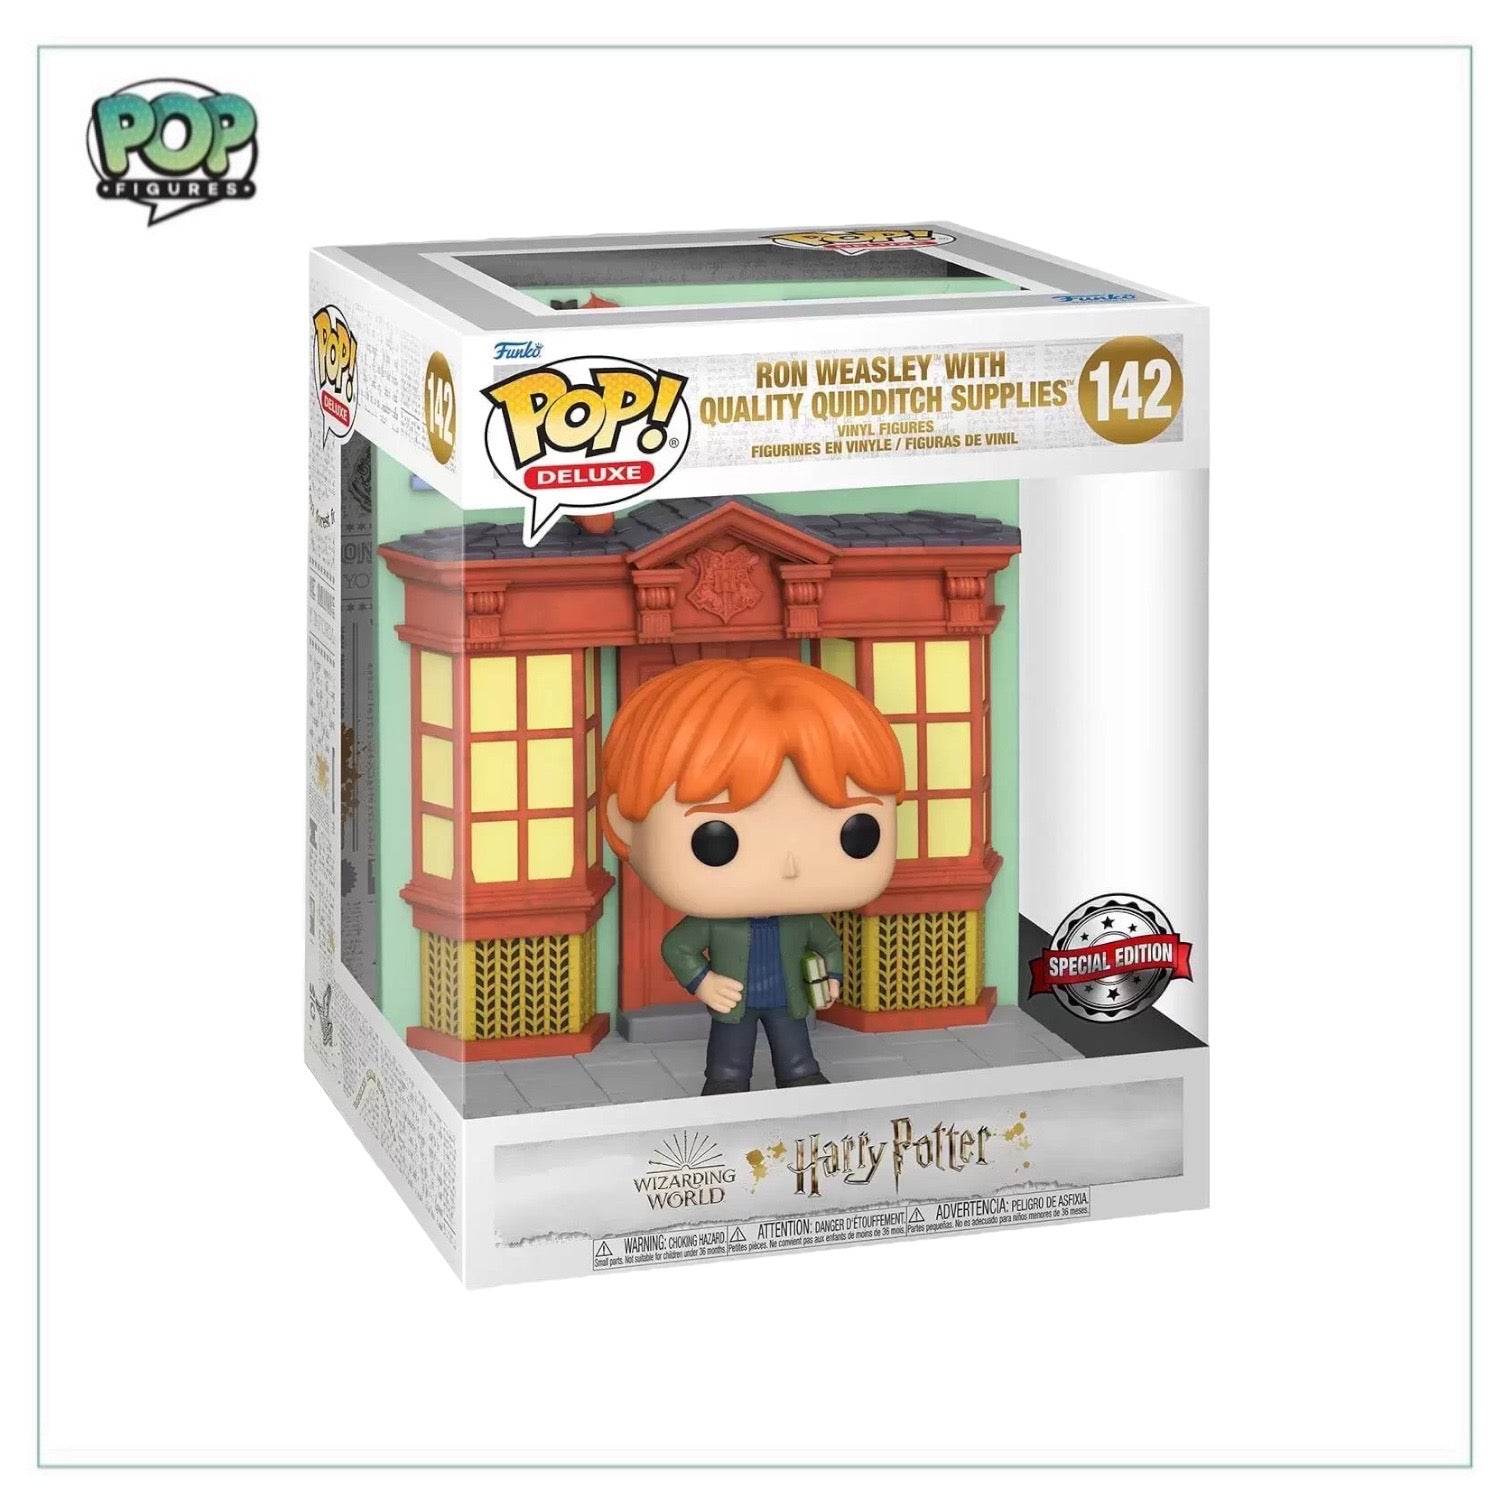 Ron Weasley with Quality Quidditch Supplies #142 Deluxe Funko Pop! - Harry Potter - Special Edition